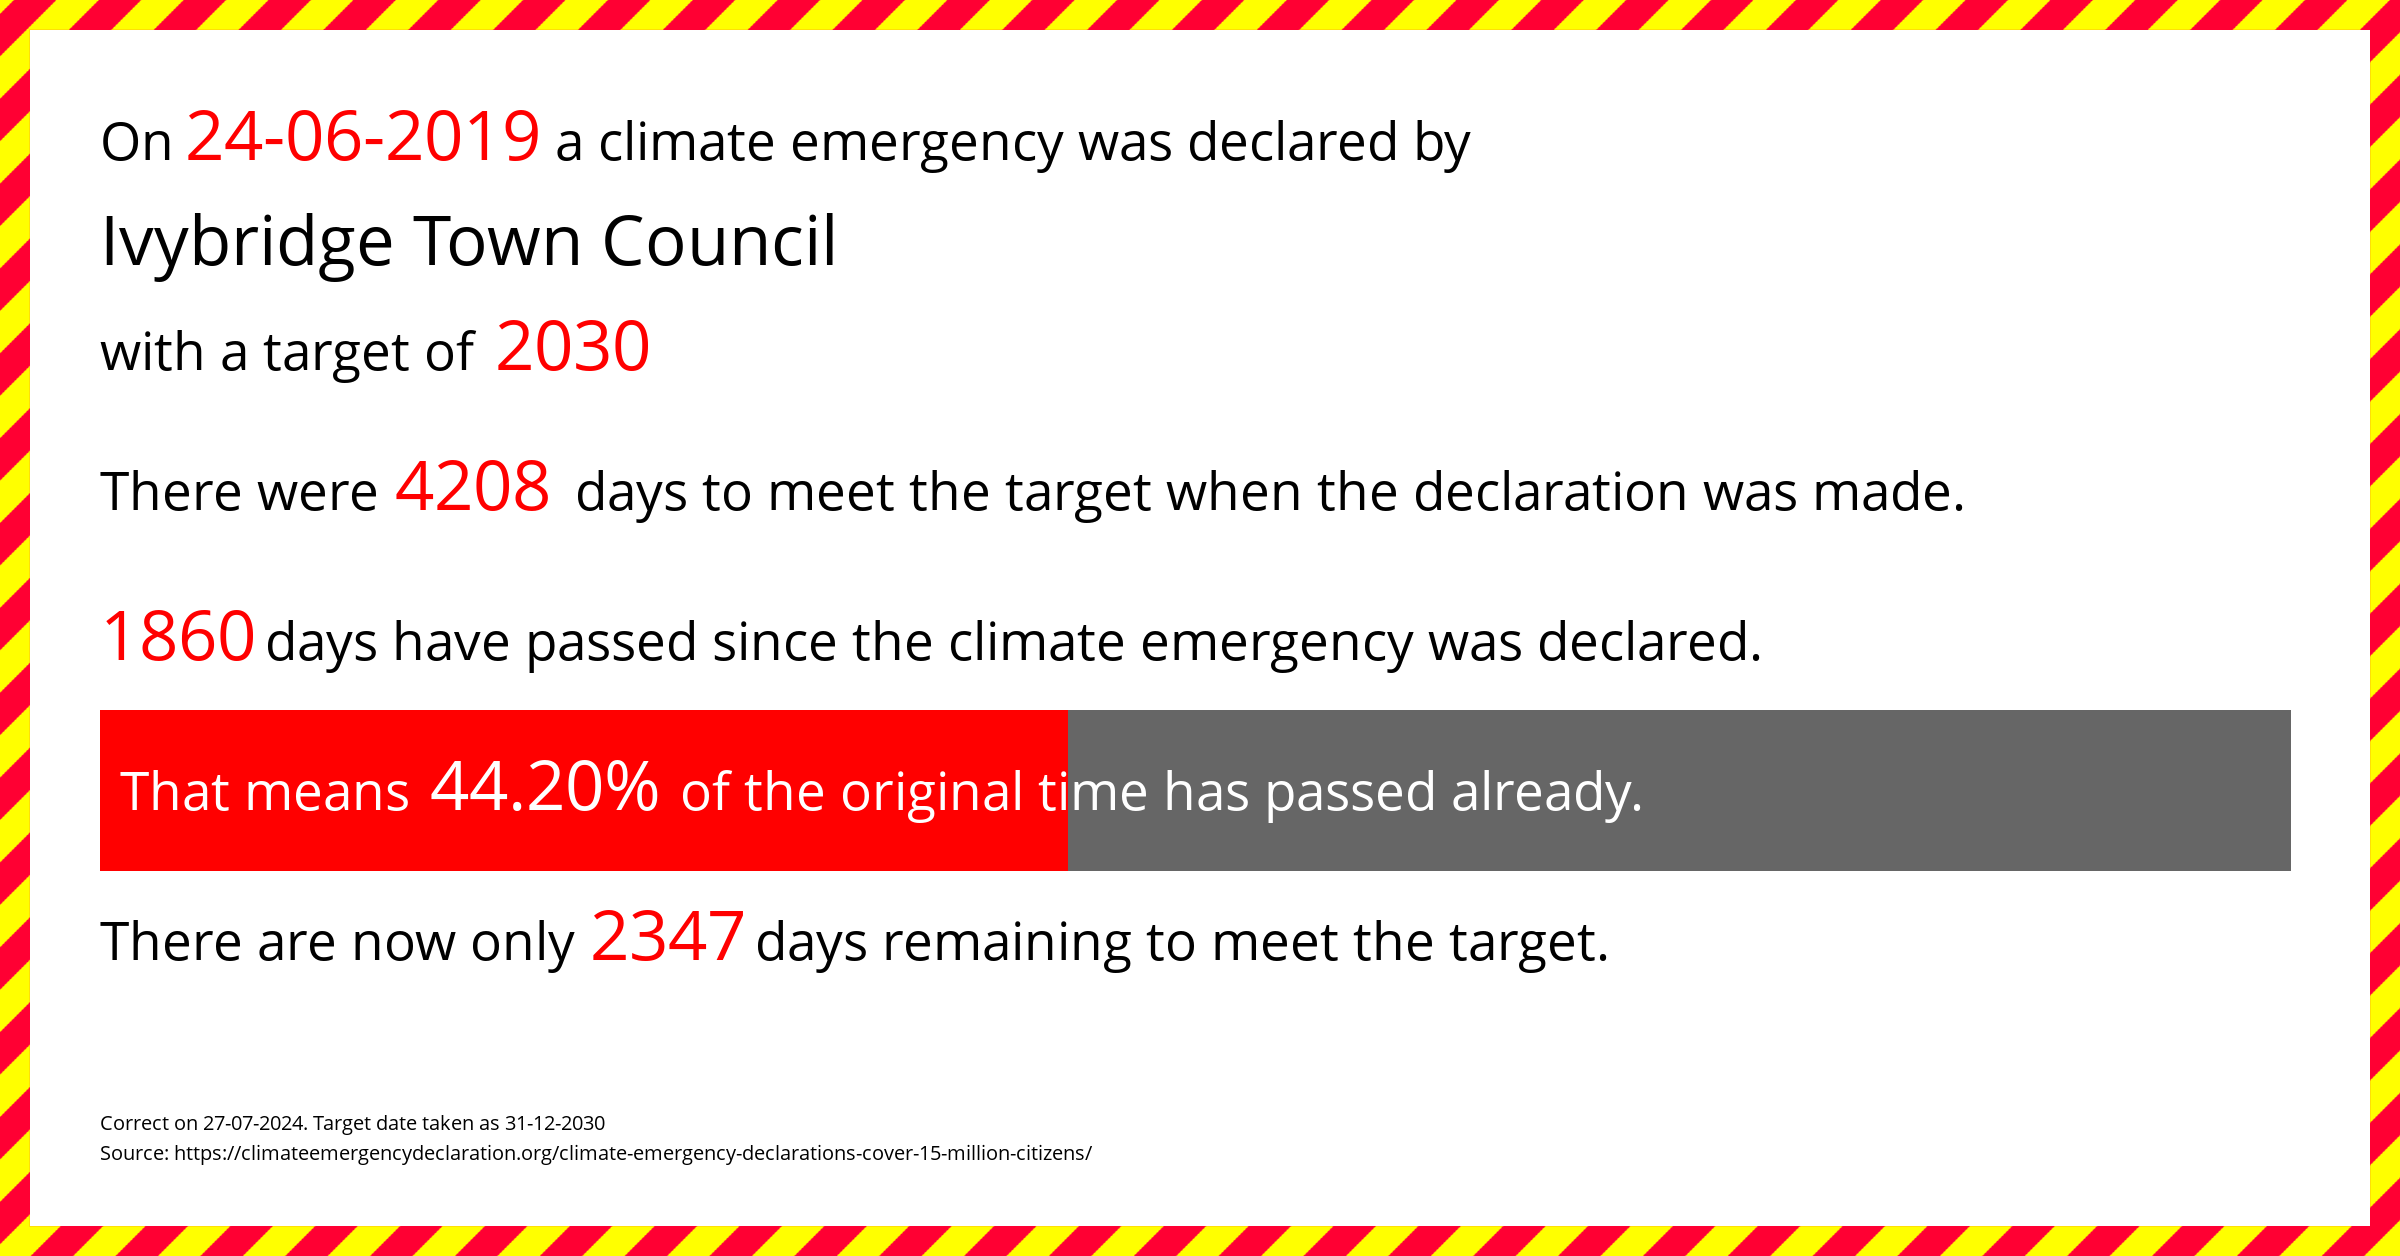 Ivybridge Town Council declared a Climate emergency on Monday 24th June 2019, with a target of 2030.